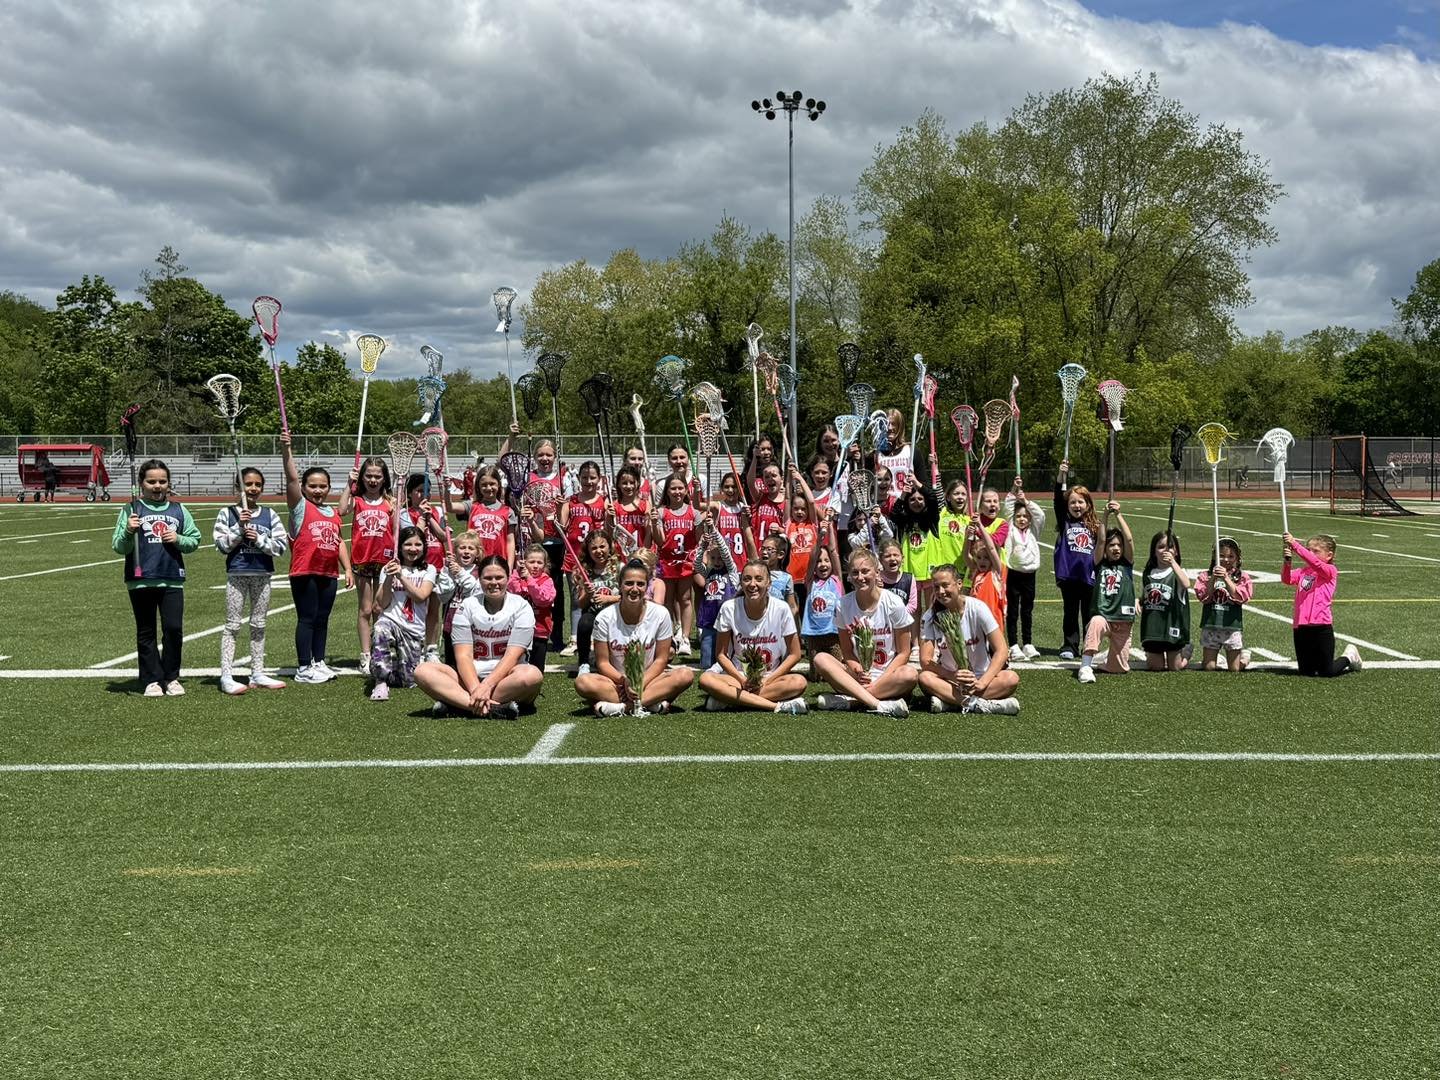 Congrats to all the GYL Alumni on a big Senior Day win as GHS defeats Litchfield this afternoon. We are proud of the GHS seniors who are role models and mentor our youngest players at Friday Night Clinics. Thank you to all the GYL players who came ou